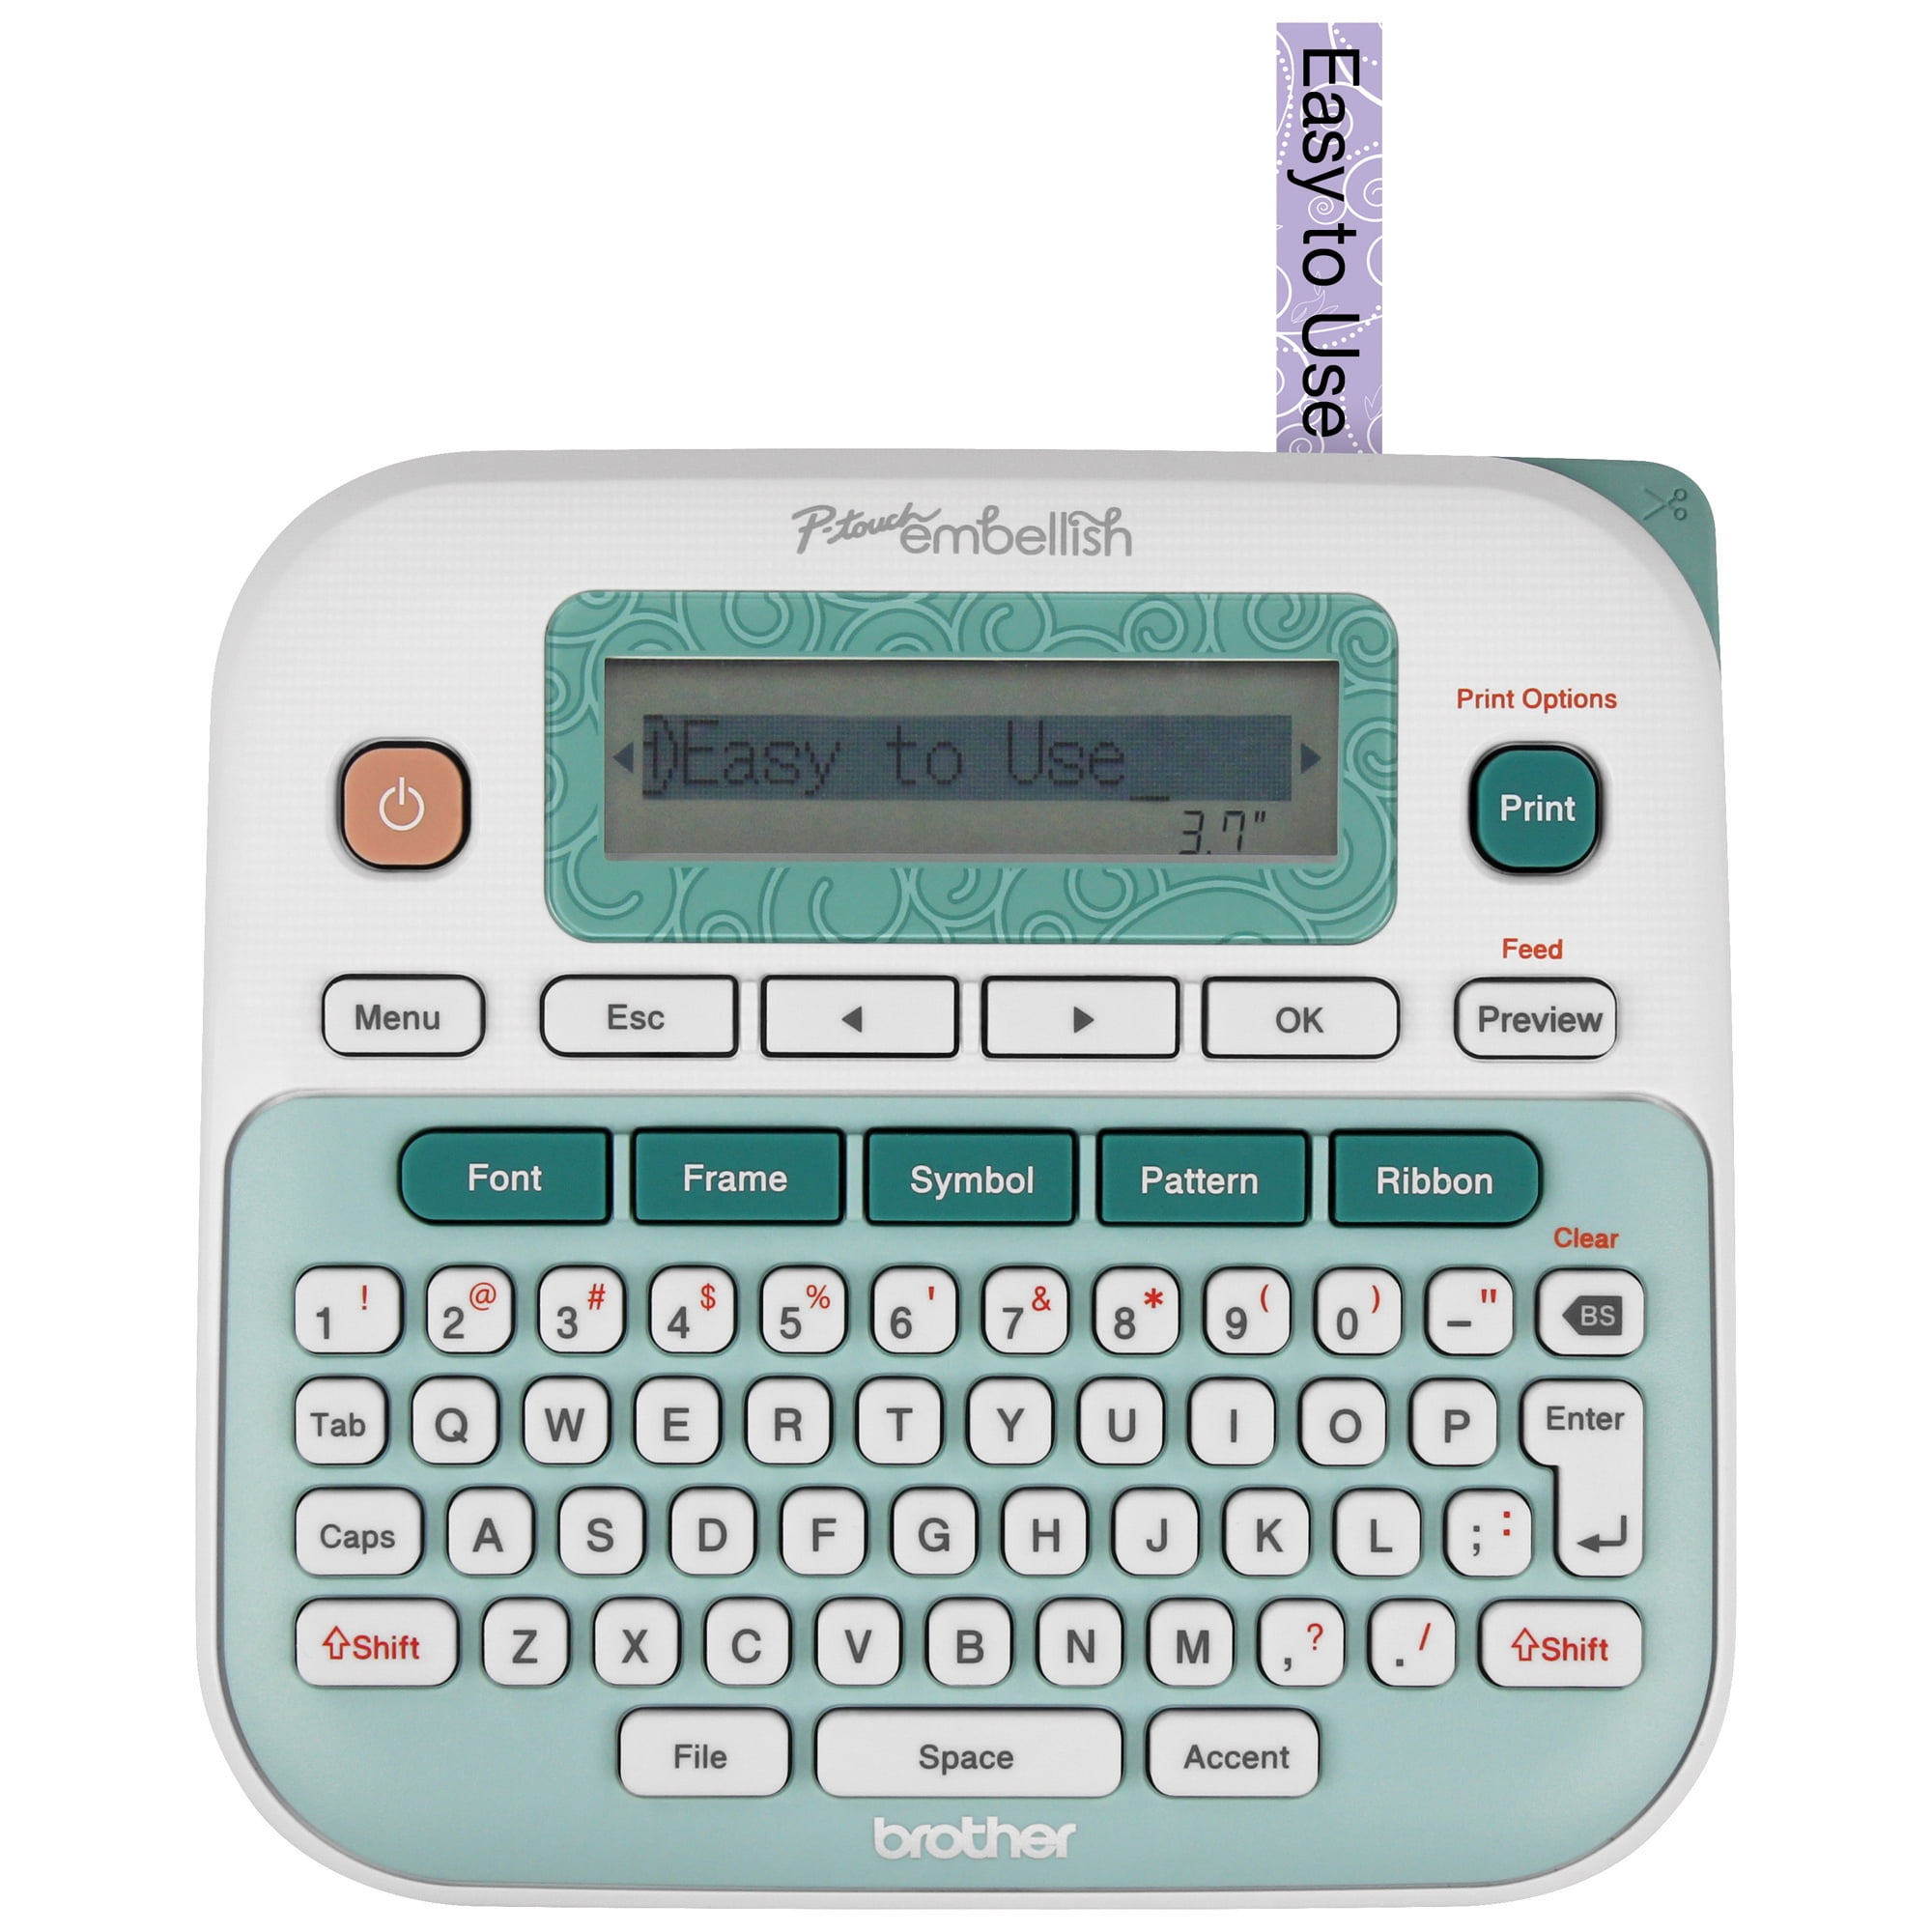 brother p-touch label maker software download